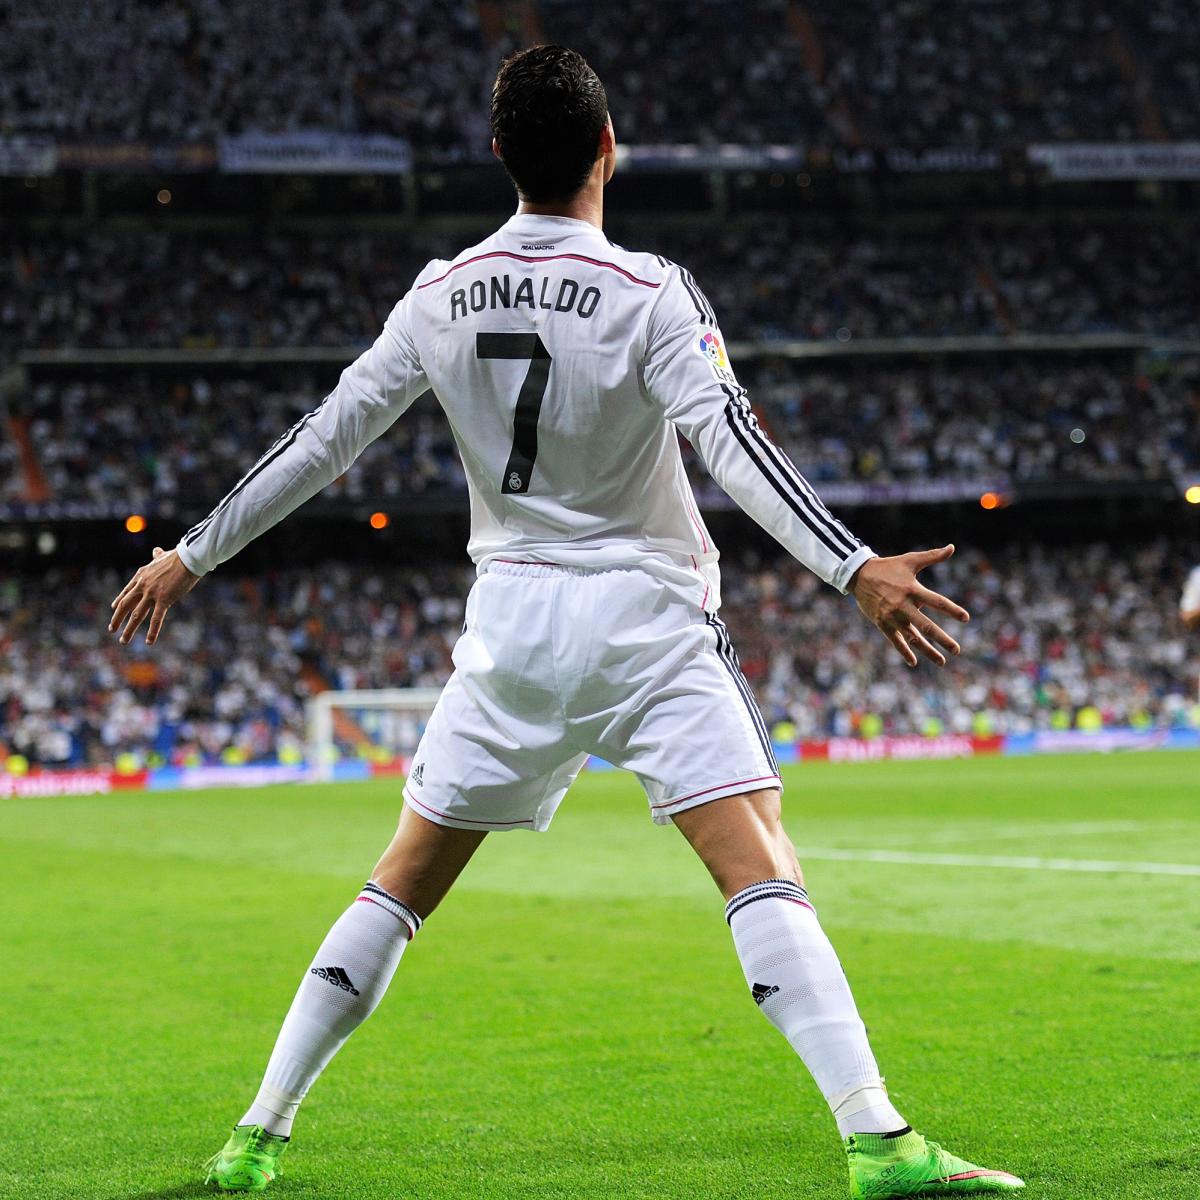 How Much Longer Does Cristiano Ronaldo Have at the Very Top? | Bleacher ...